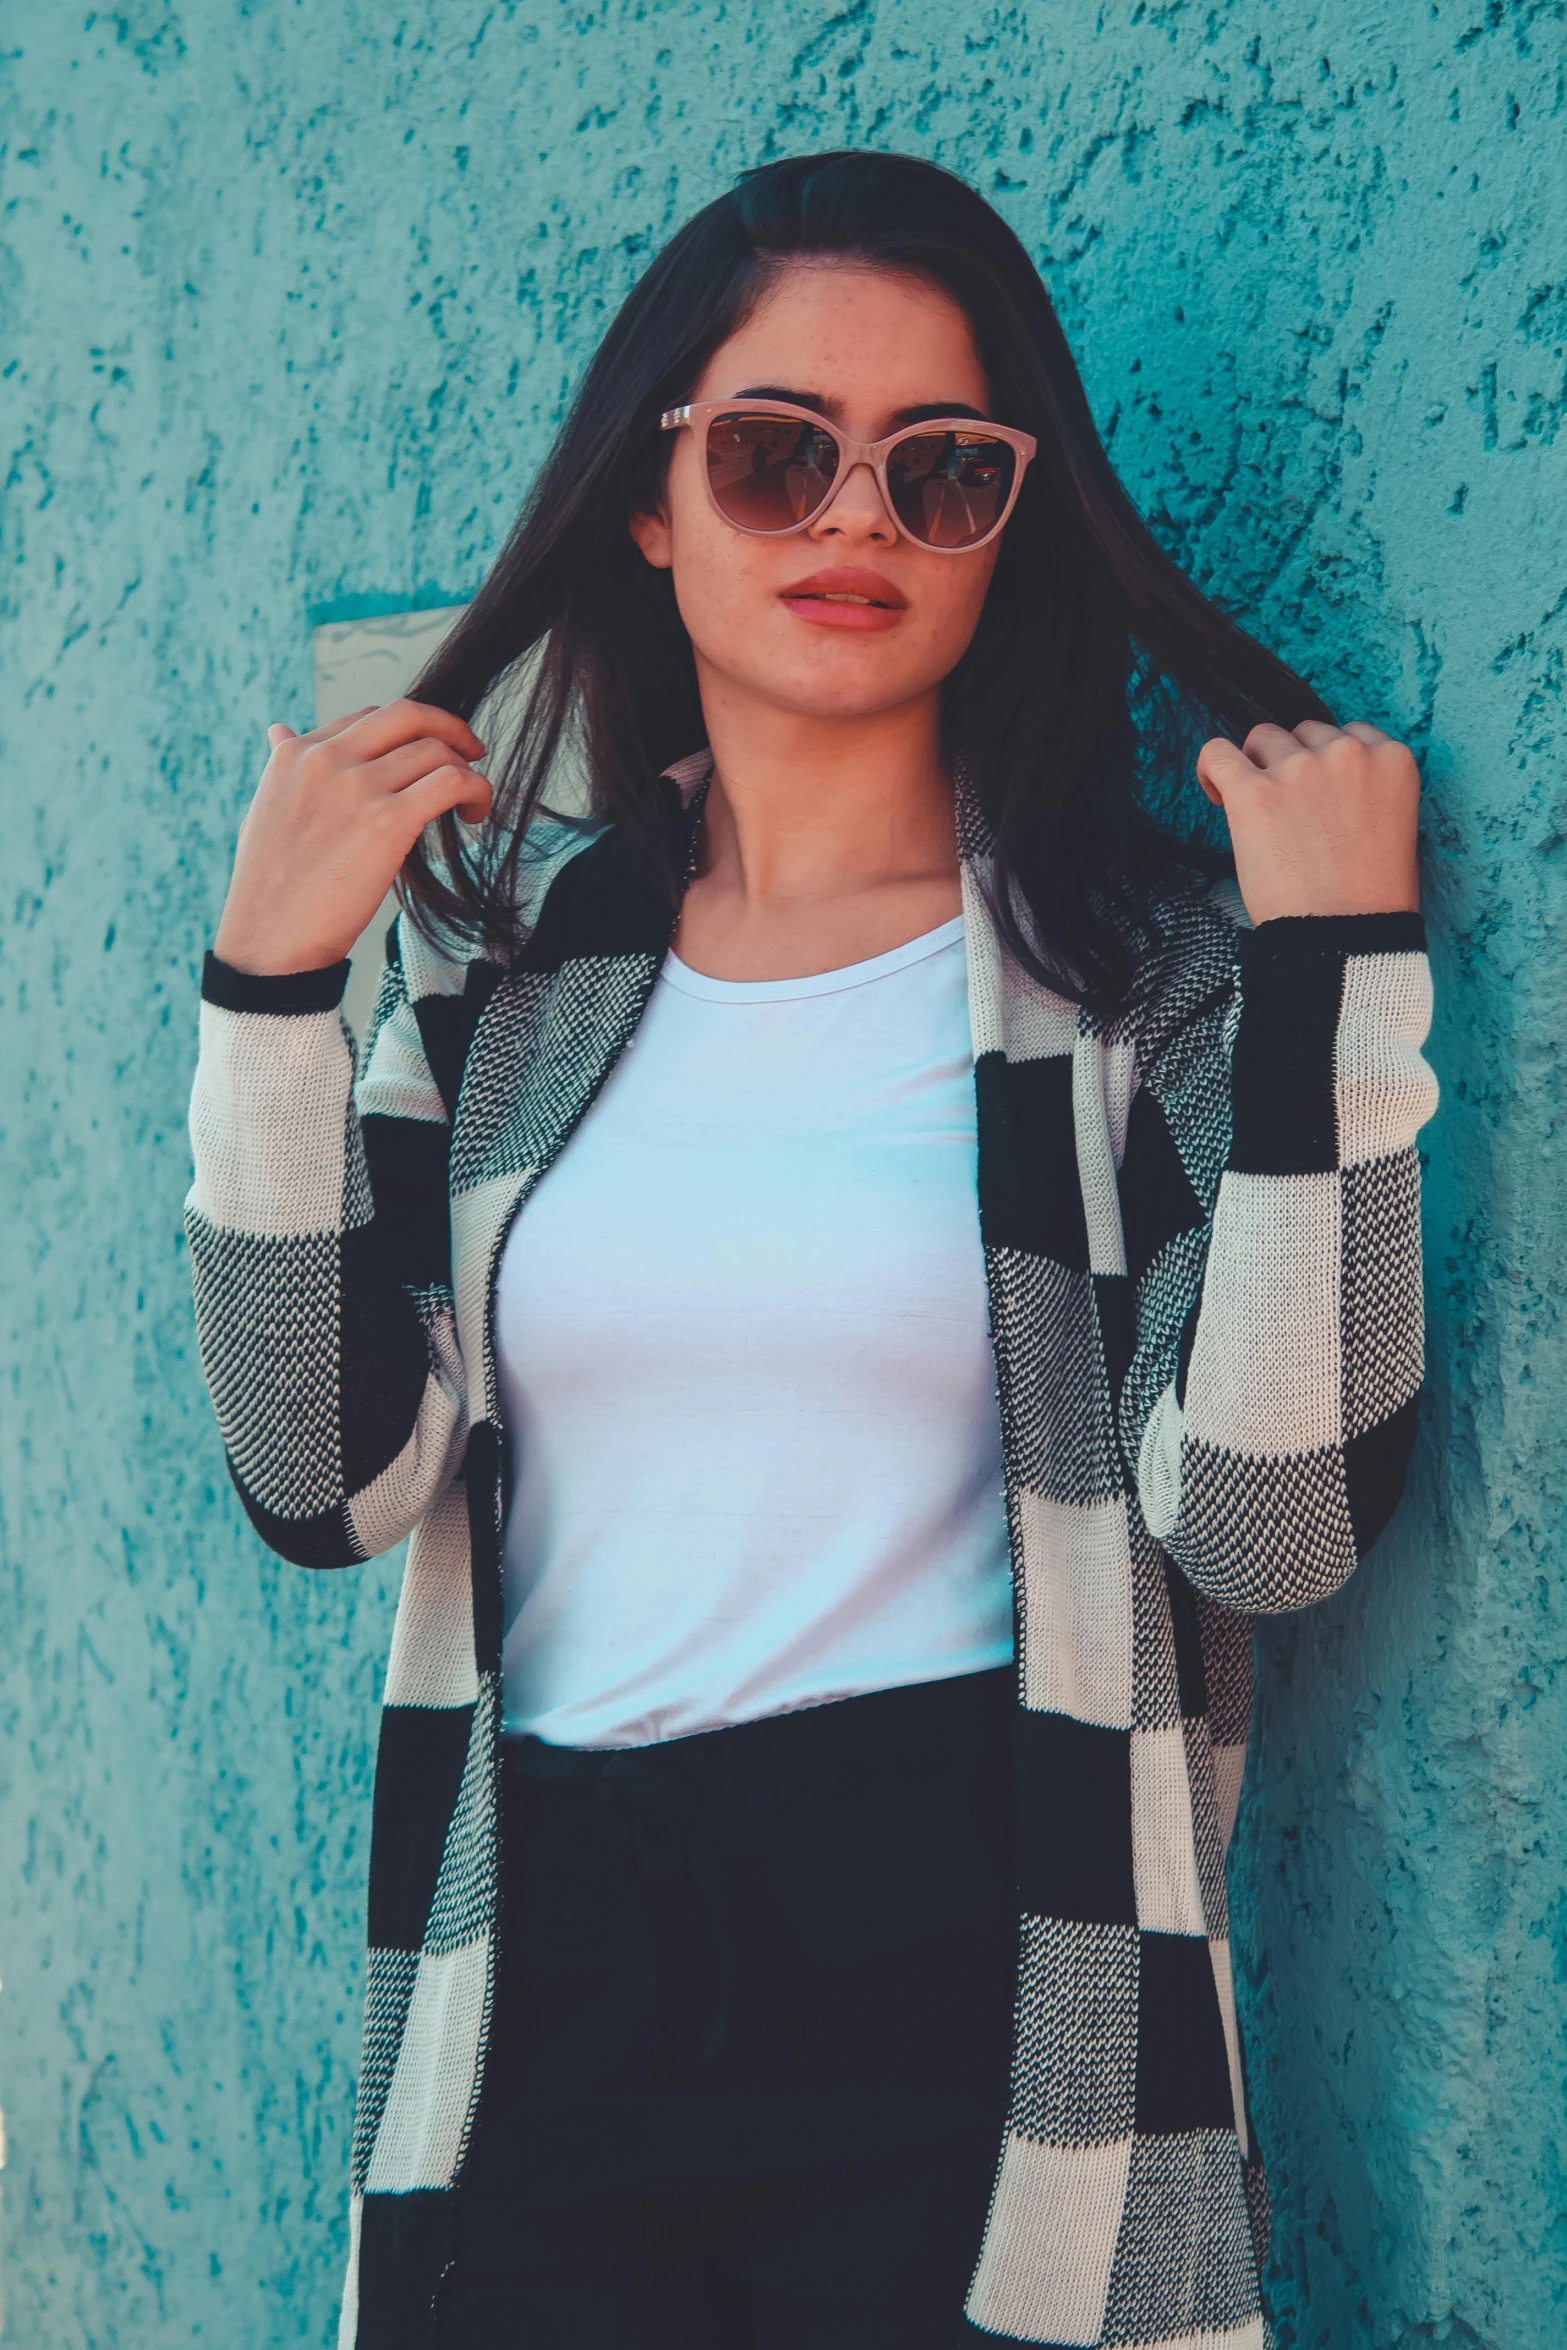 the woman is posing by the wall wearing a sweater and jeans